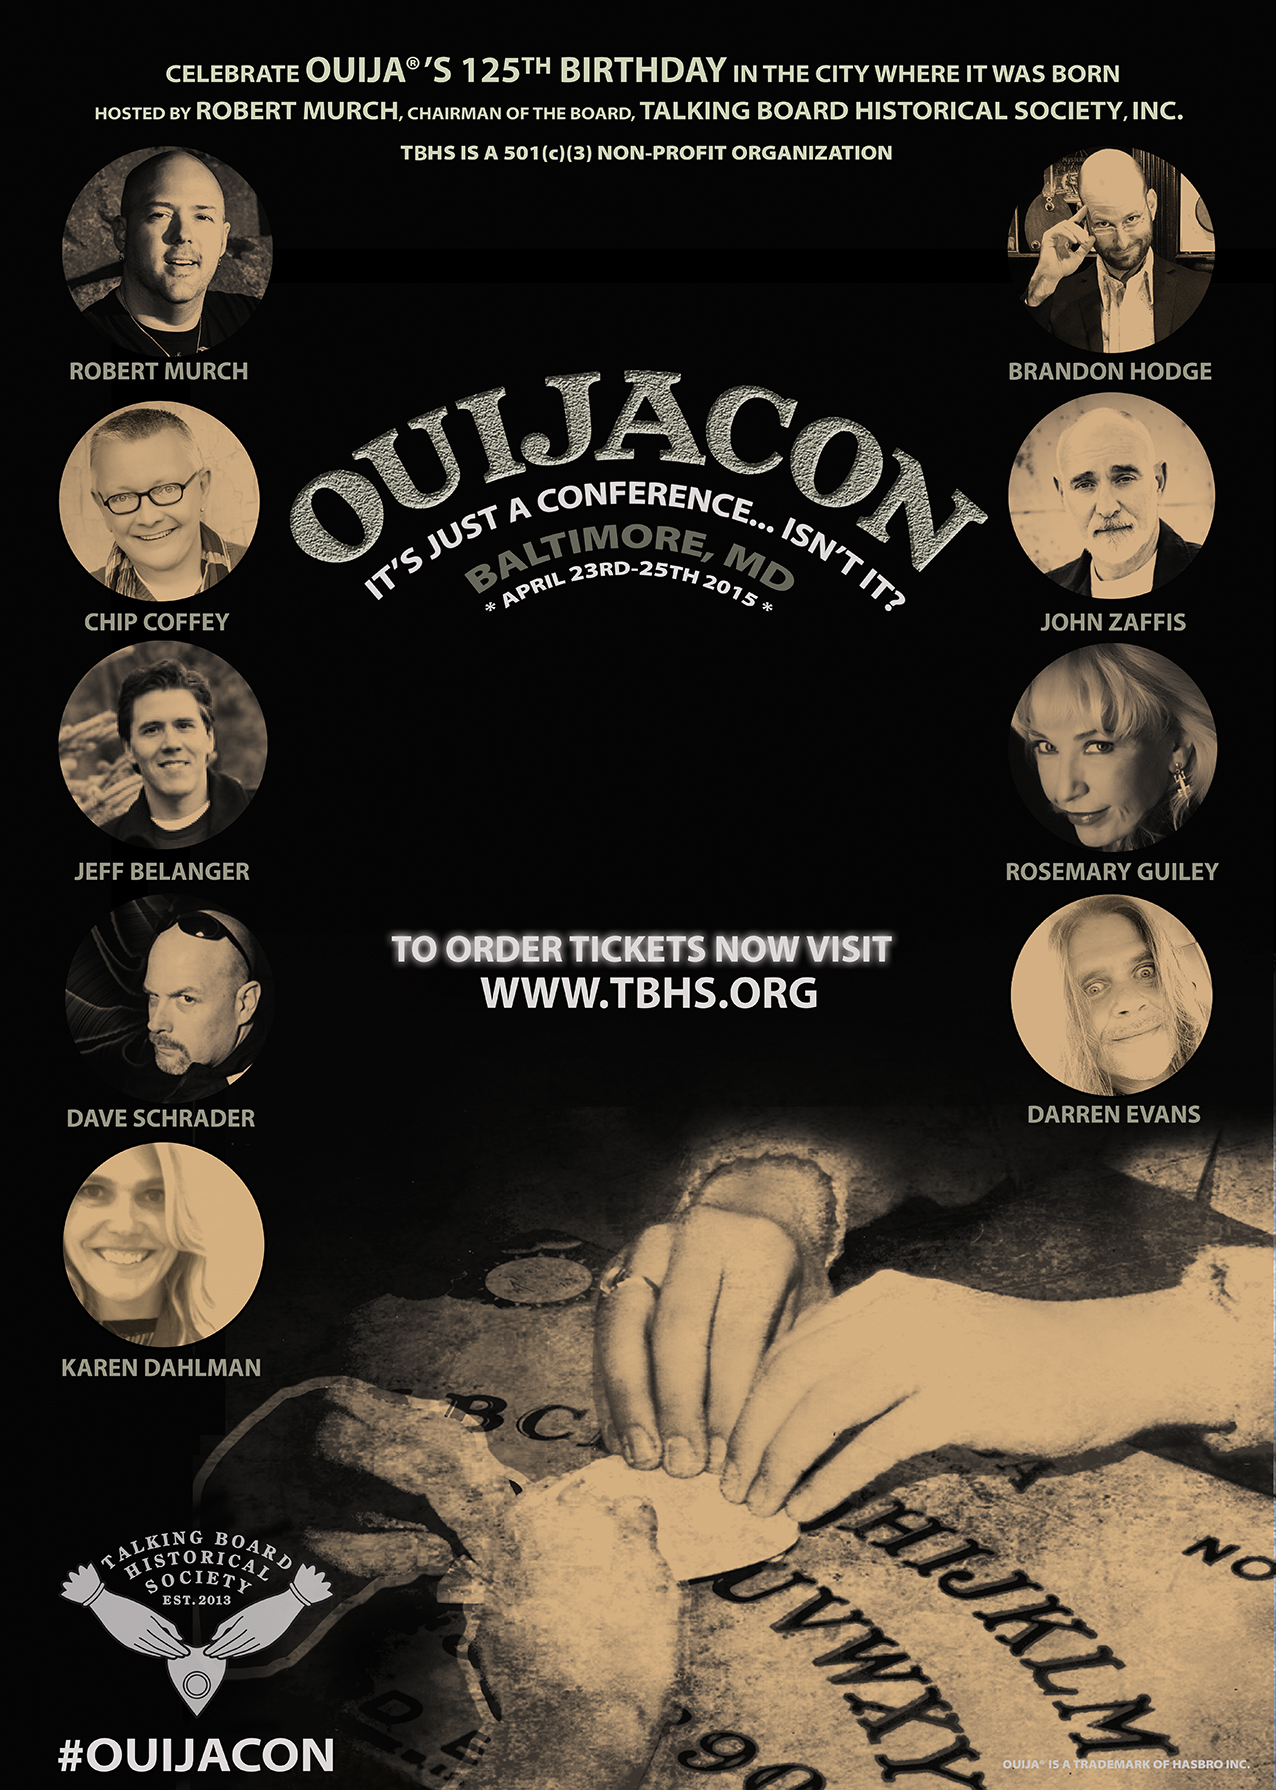 OUIJACON - April 23-25, 2015 in Baltimore, Maryland